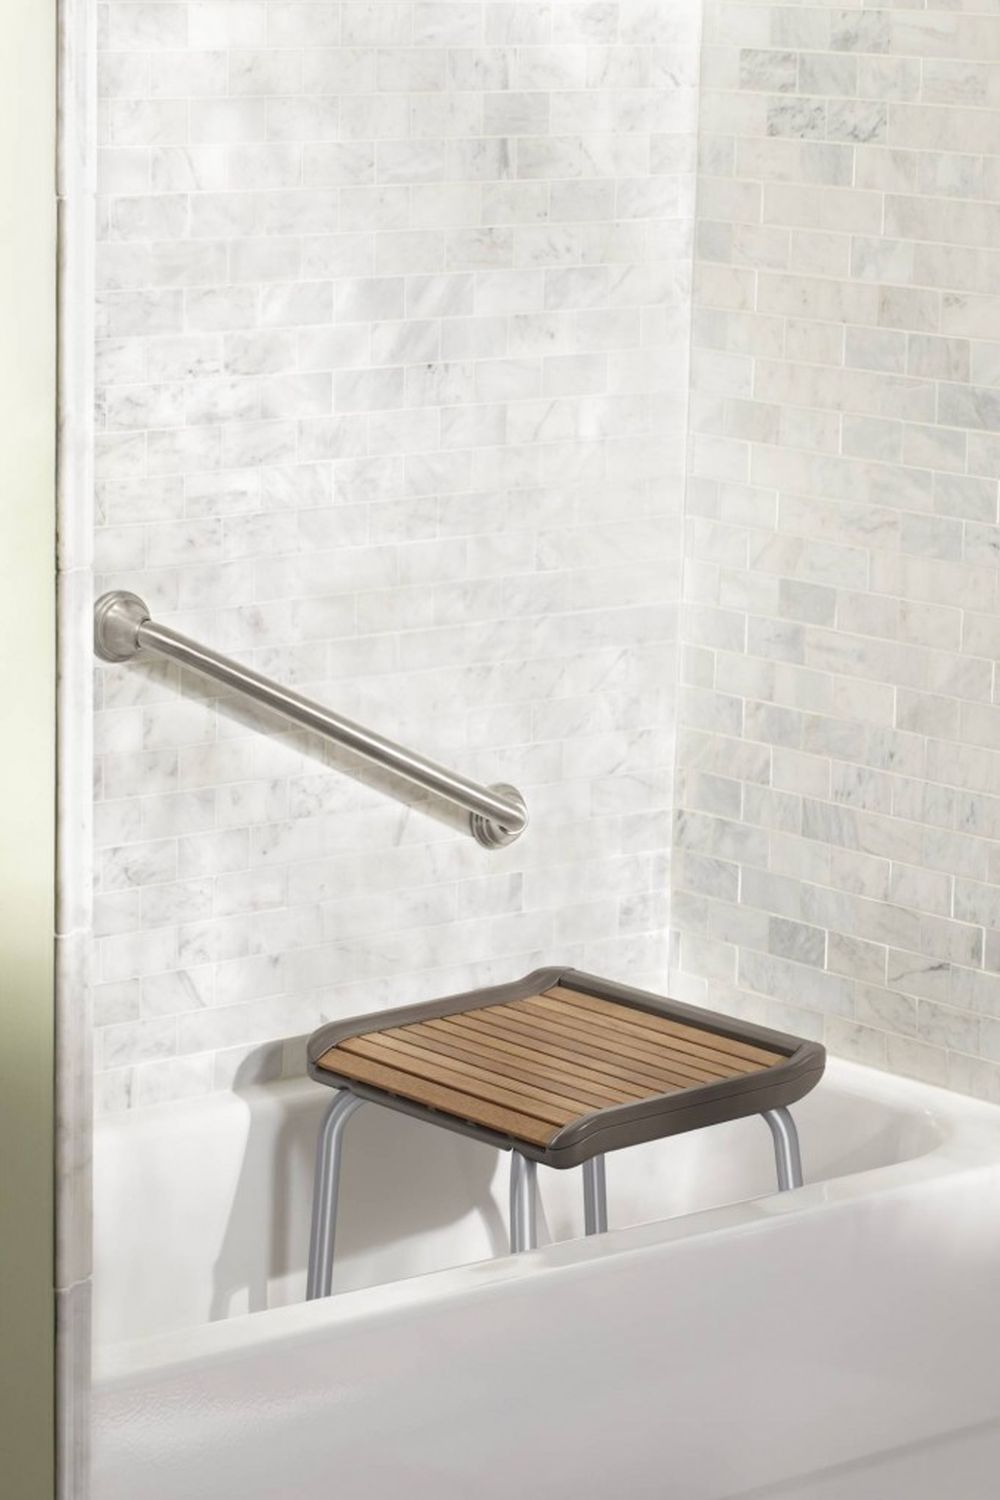 ada bathroom grab bar placement how to install bathroom safety bars in your house